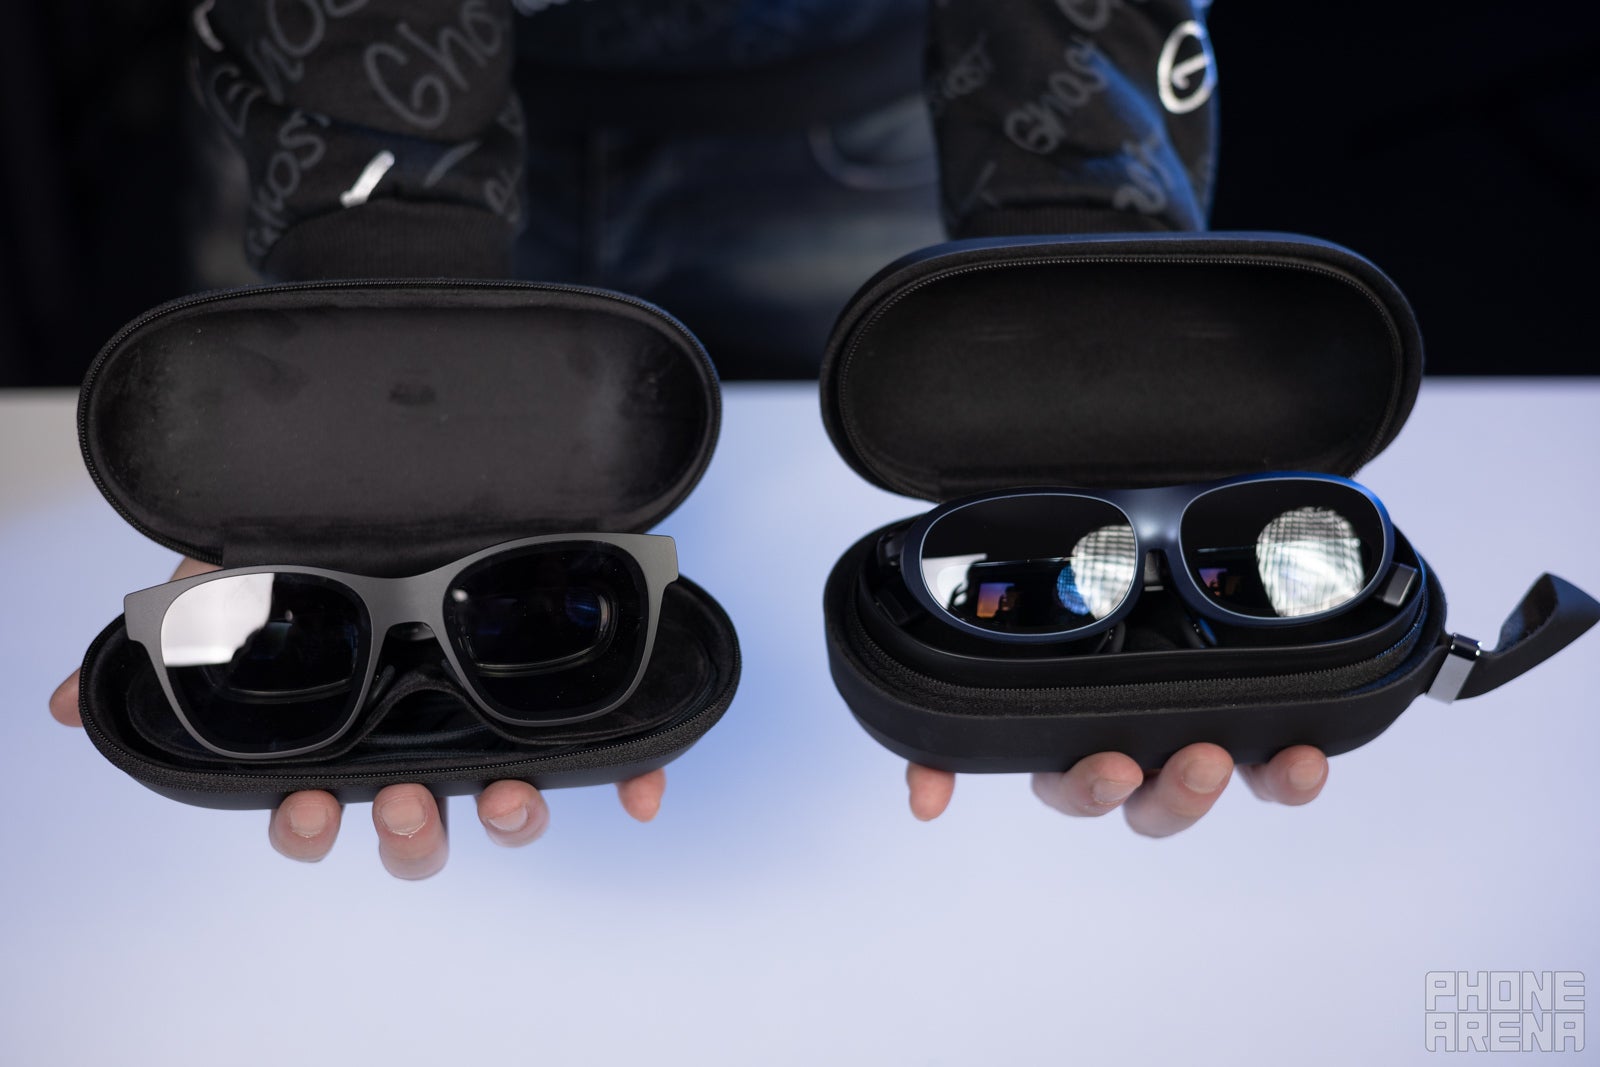 (Image credit - PhoneArena) The Xreal Air (left) and Rokid Max (right) in their carrying cases - Xreal Air vs Rokid Max: The best consumer AR glasses right now? Which should you buy in 2023?